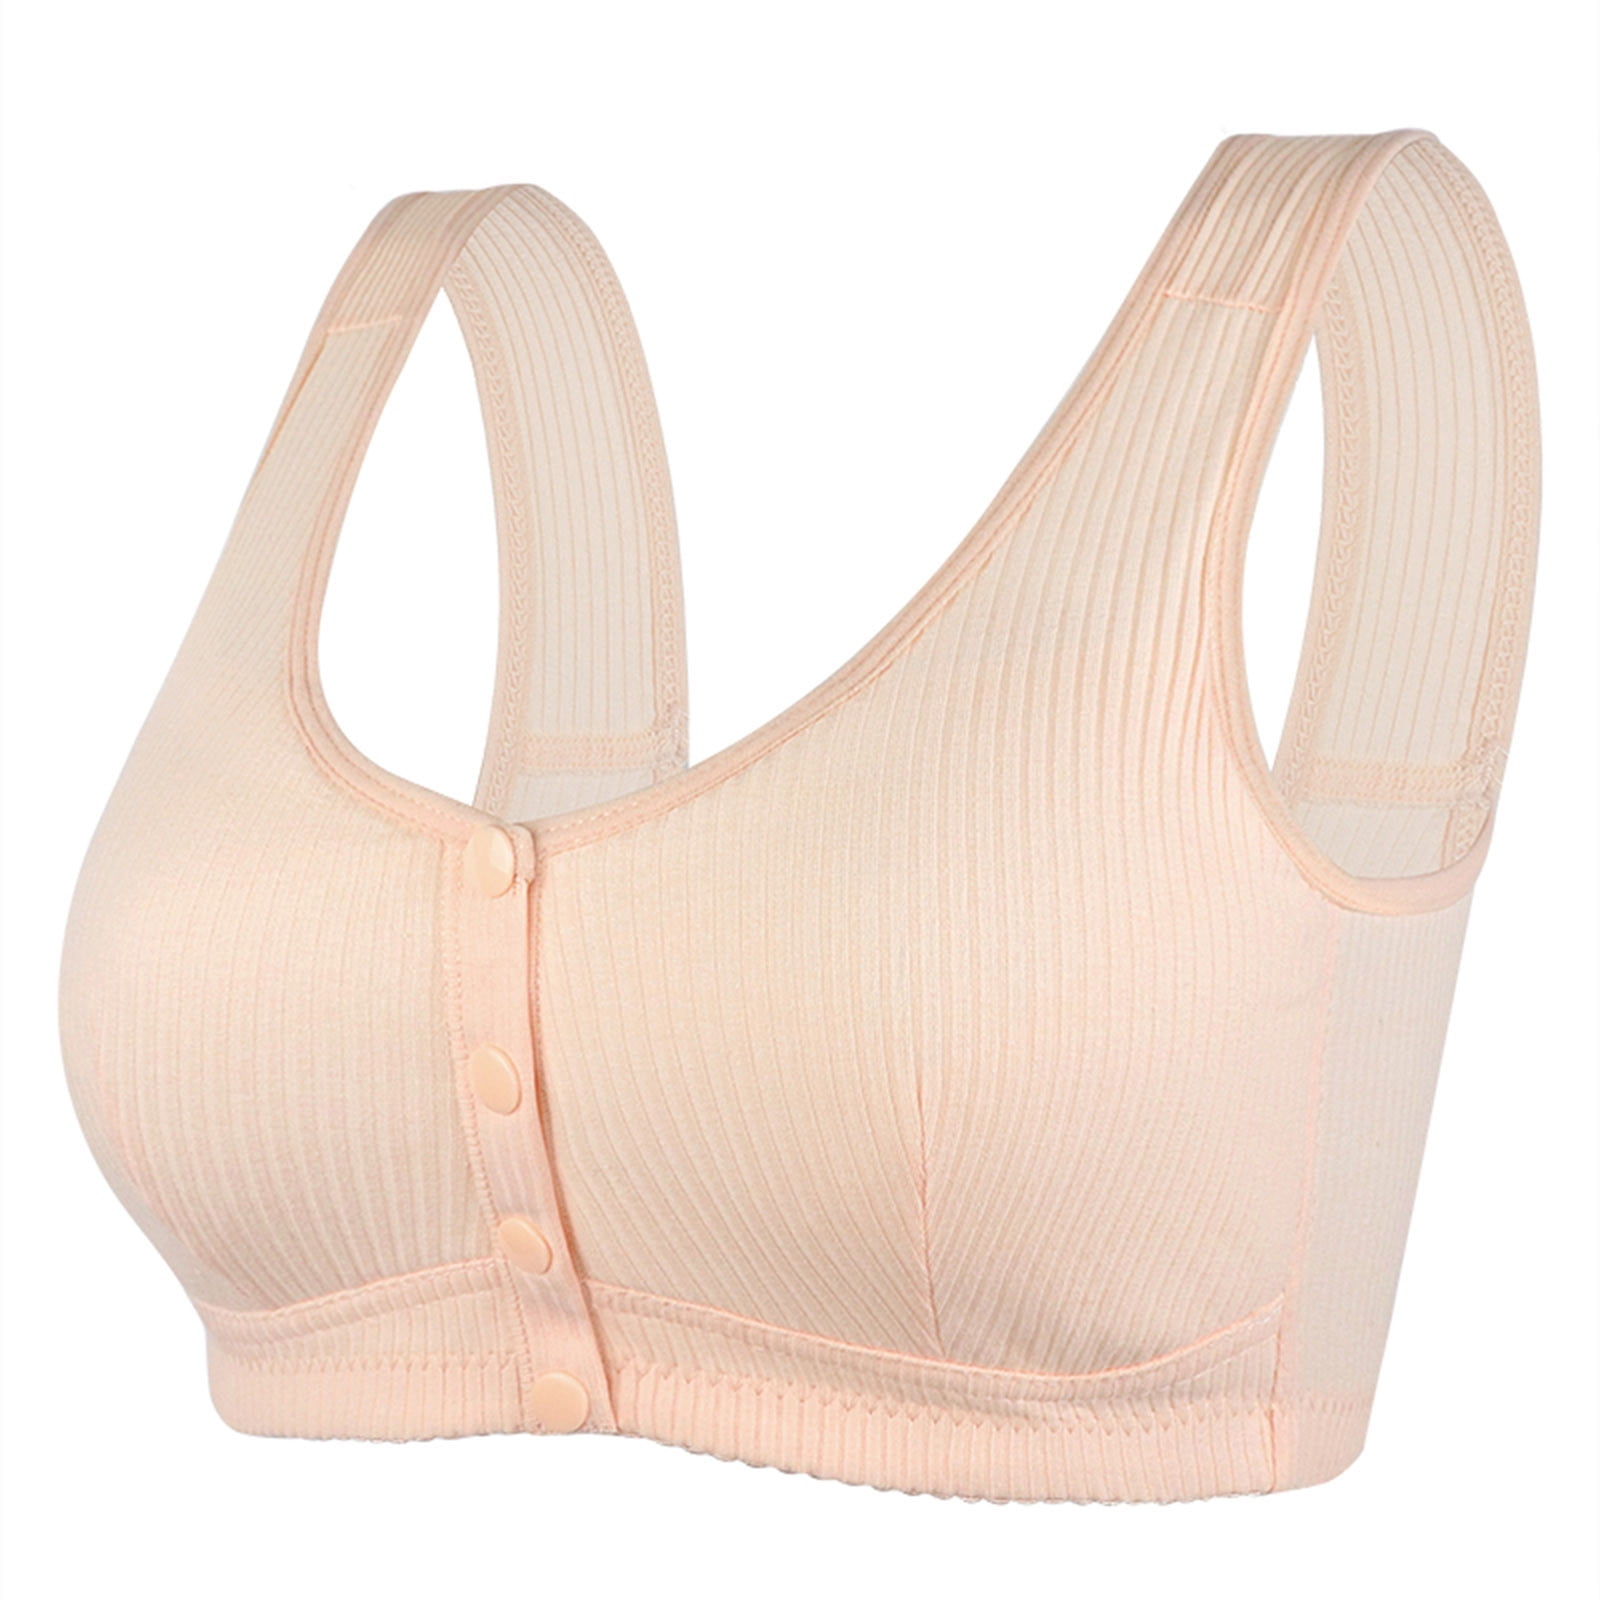 qILAKOG Women Large Sized Bras,Full Coverage Front Closure Push Up High  Support Breathable Gathered,Female Everyday Wear Bra Without Steel